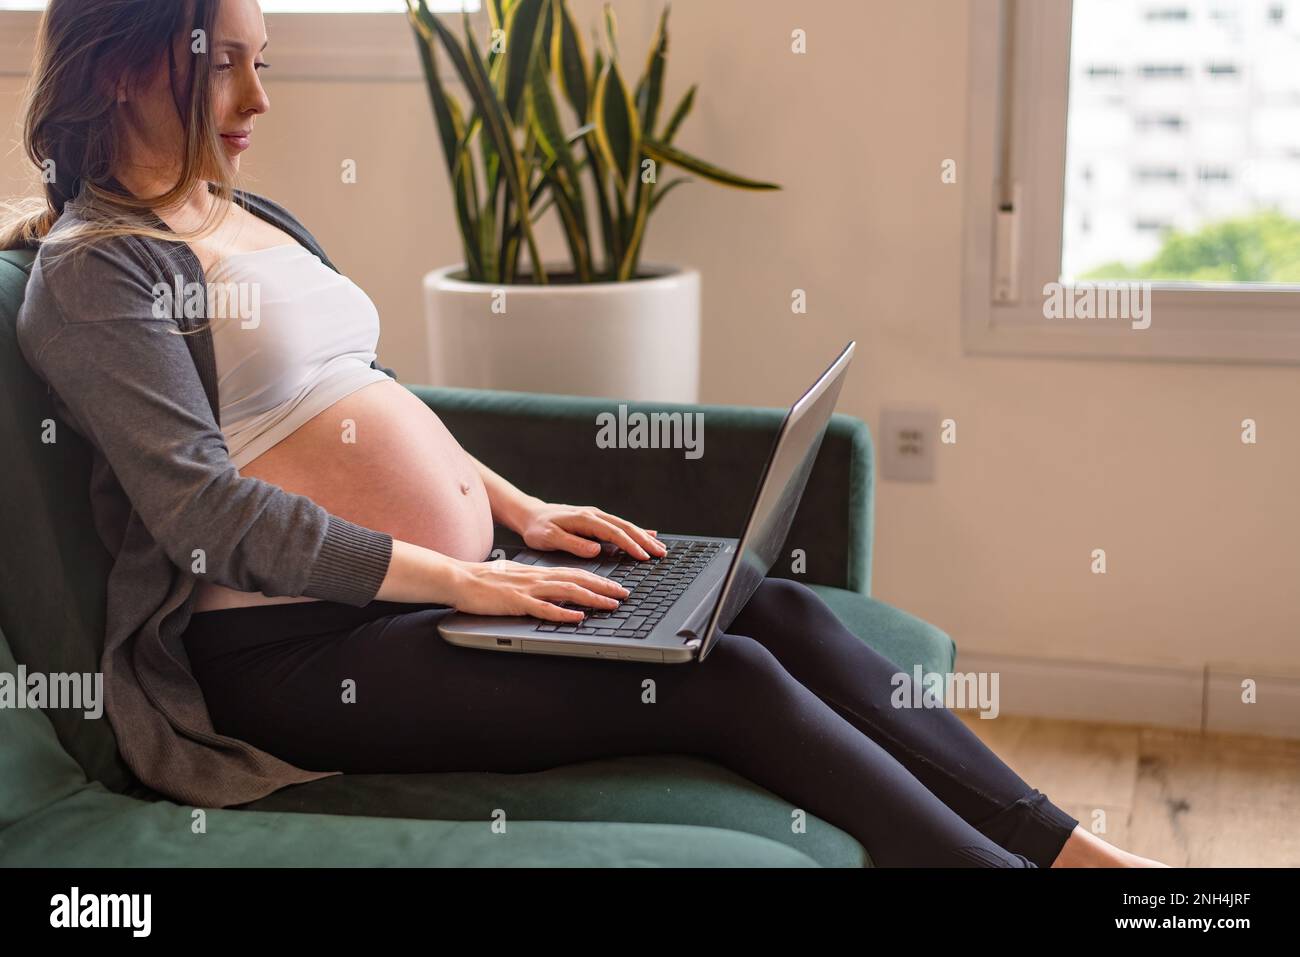 pregnant woman on bed rest working Stock Photo